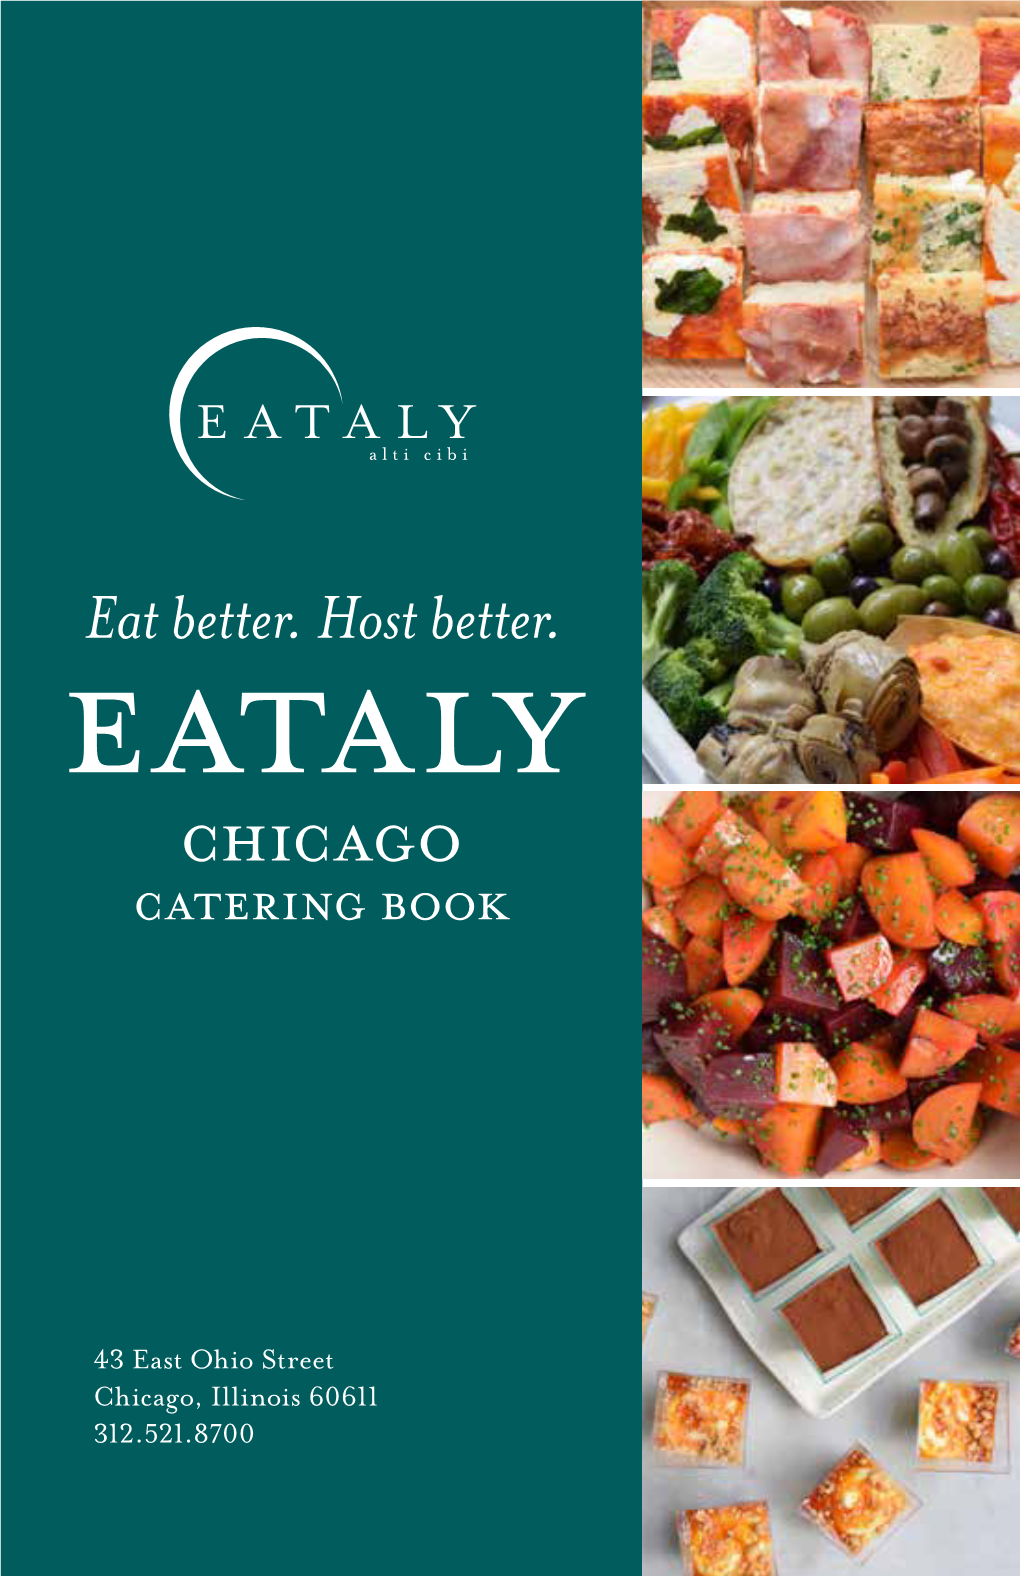 Chicago Catering Book